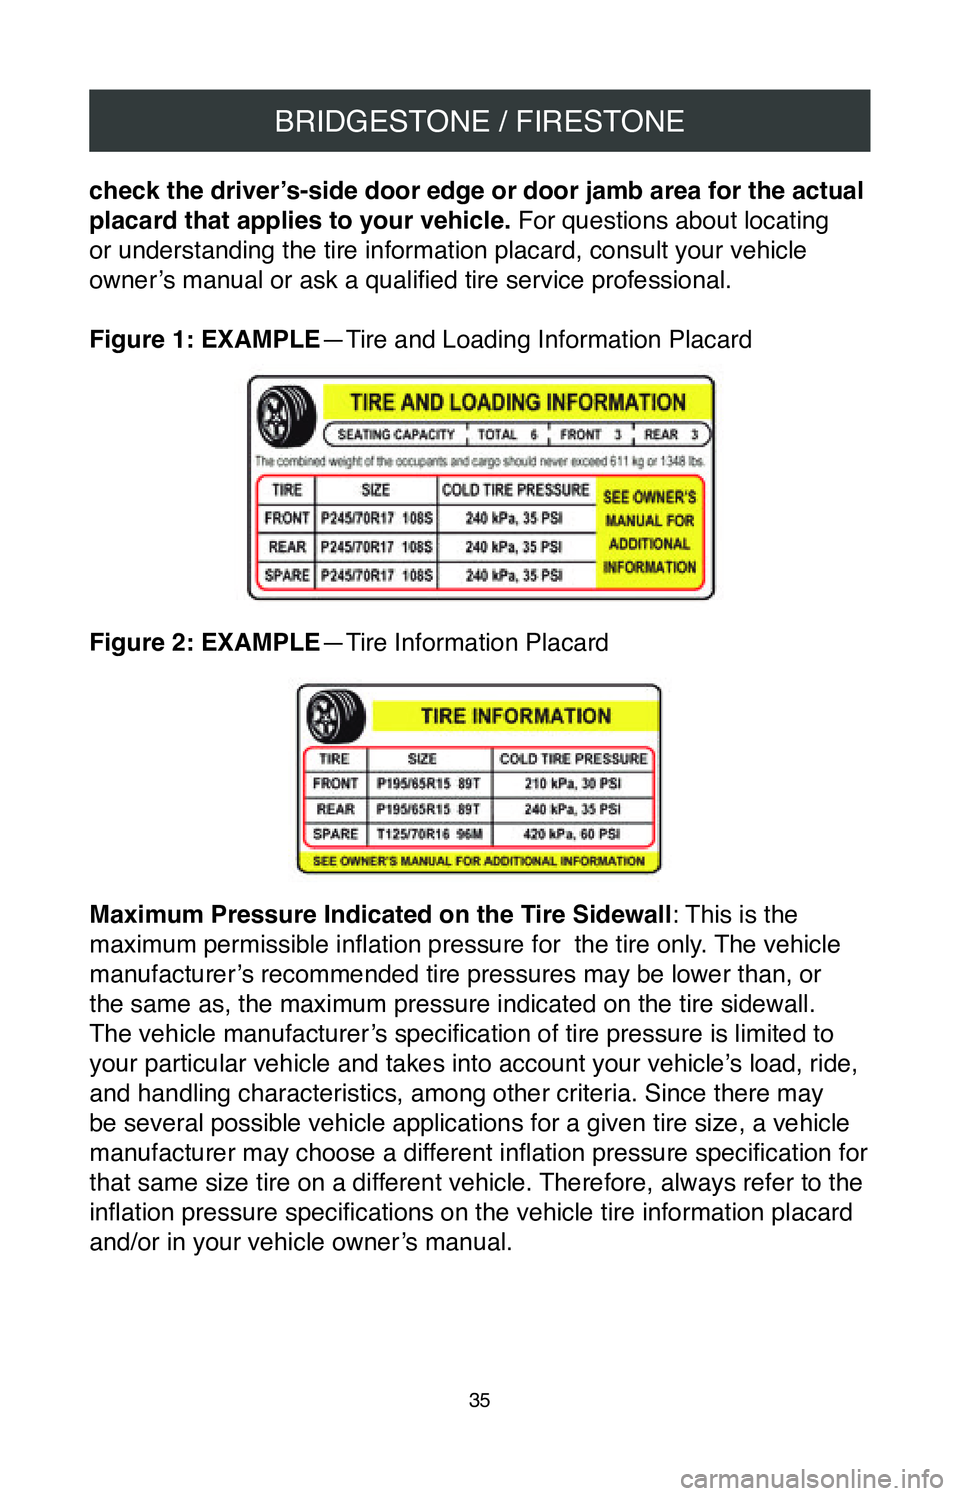 TOYOTA YARIS 2020  Warranties & Maintenance Guides (in English) BRIDGESTONE / FIRESTONE
35
check the driver’s-side door edge or door jamb area for the actual 
placard that applies to your vehicle. For questions about locating 
or understanding the tire informati